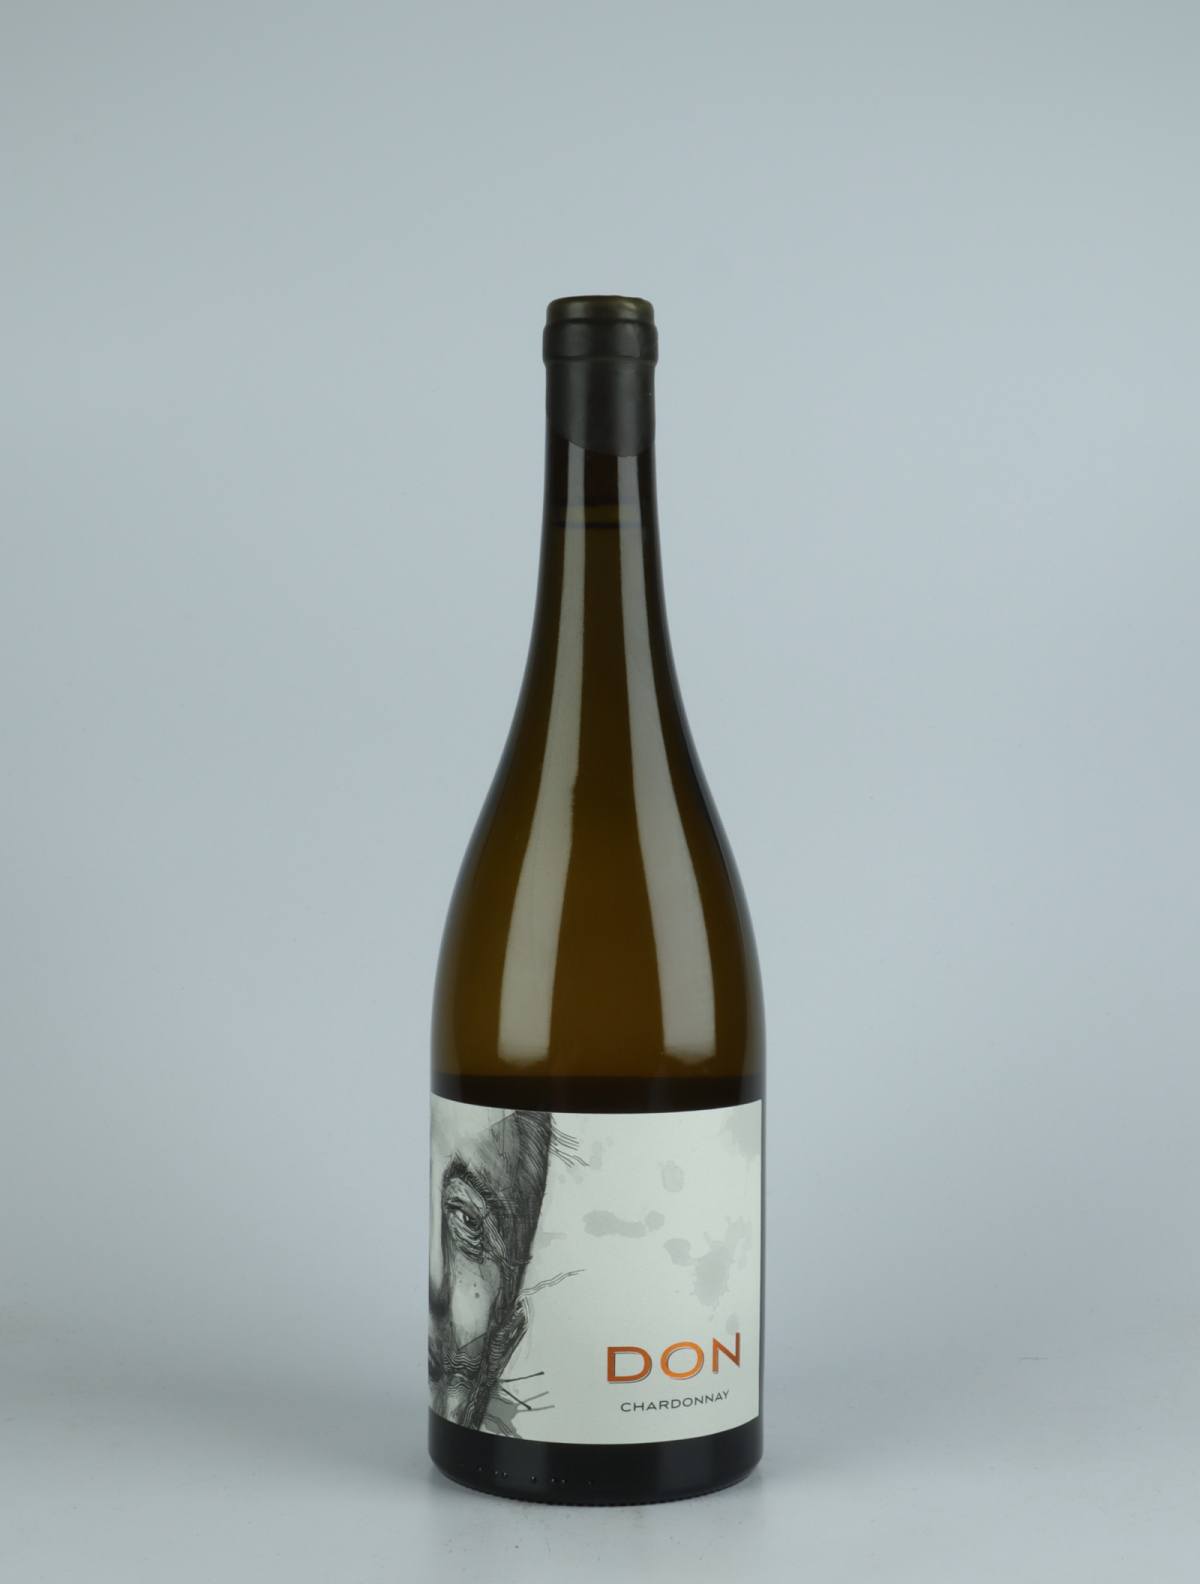 A bottle 2020 Top Block Chardonnay White wine from Don, Nelson in New Zealand